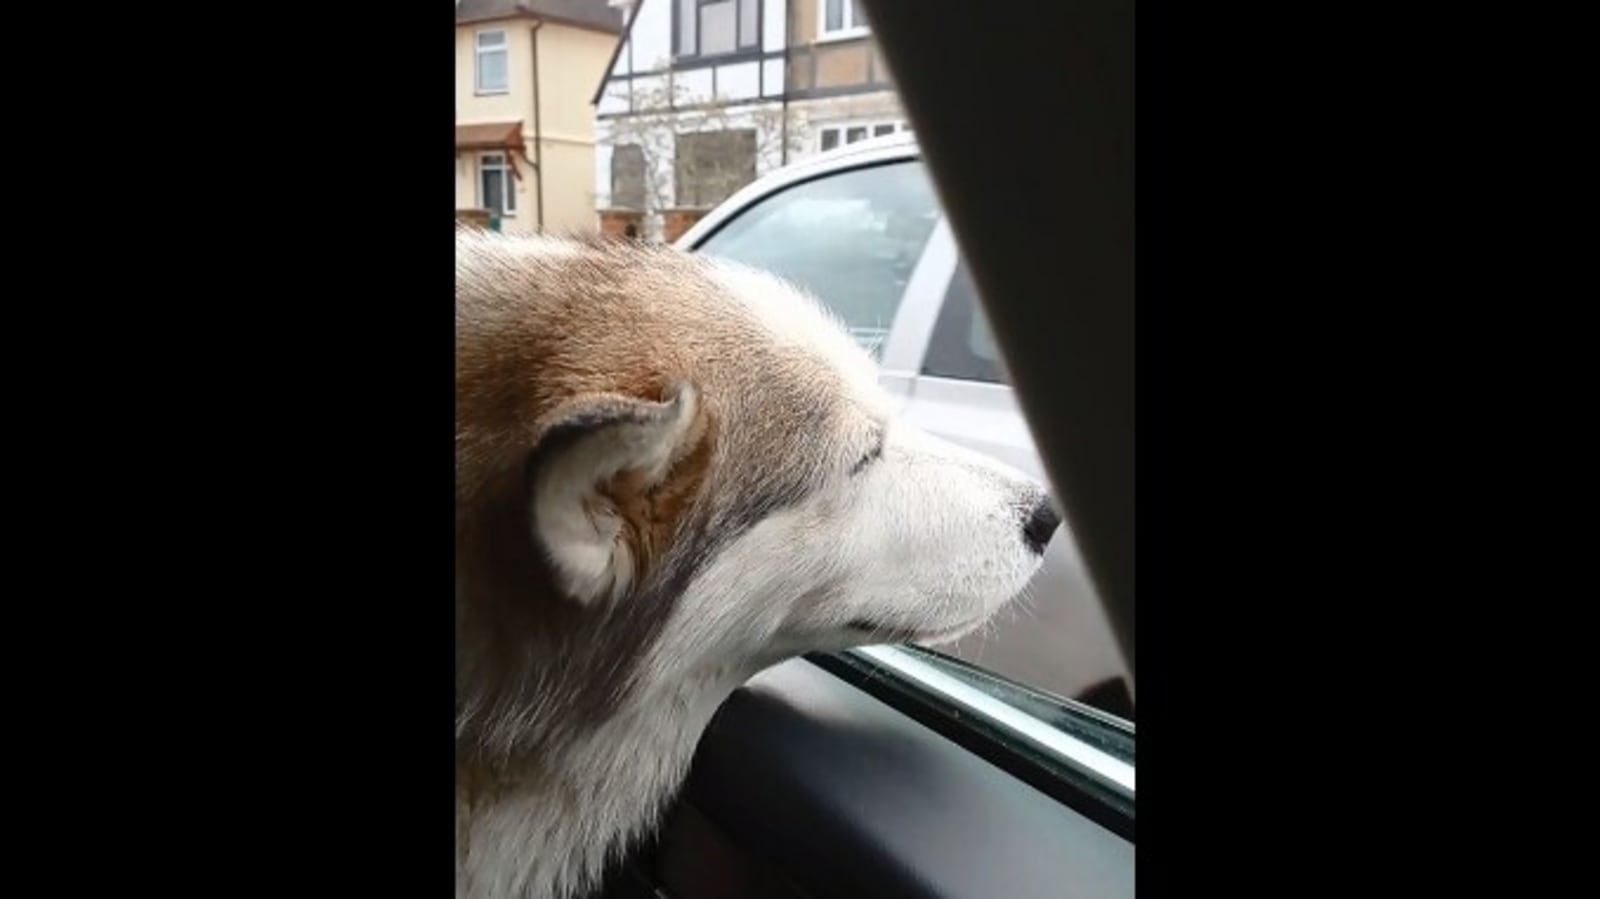 Elderly dog may be too old to run but enjoys windy car rides. Watch cute video